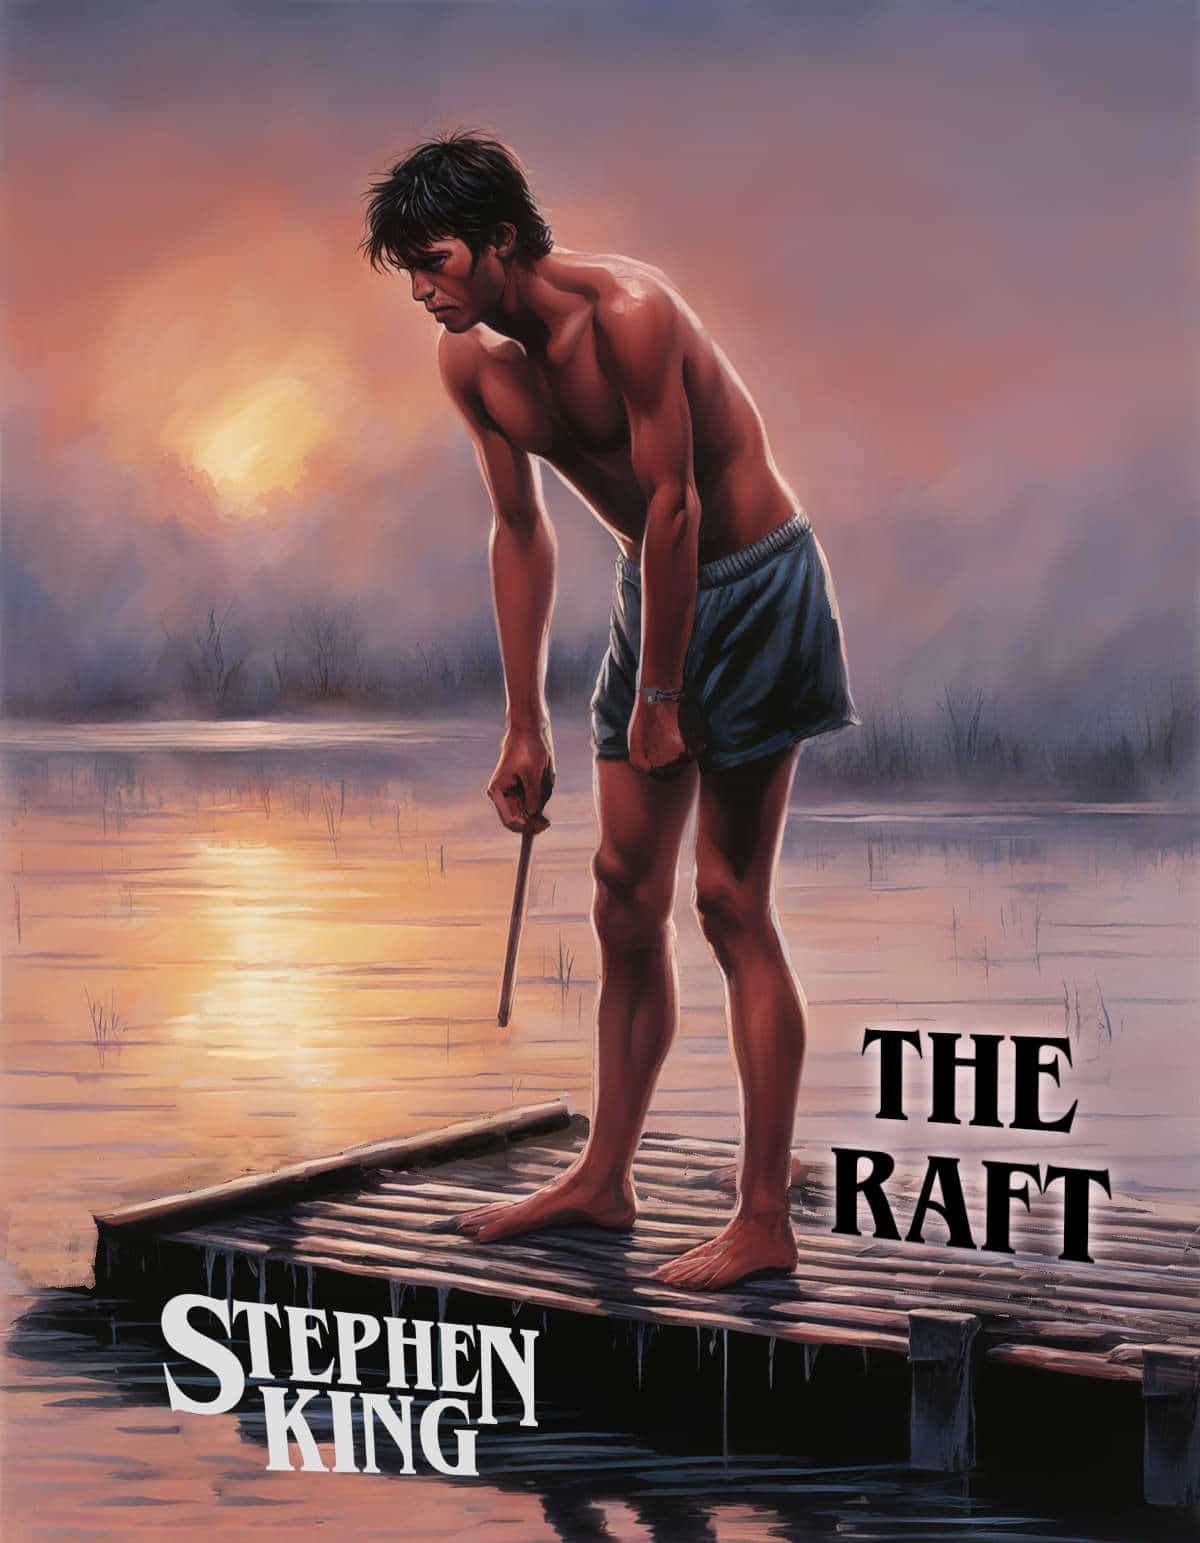 The Raft by Stephen King Short Story Analysis